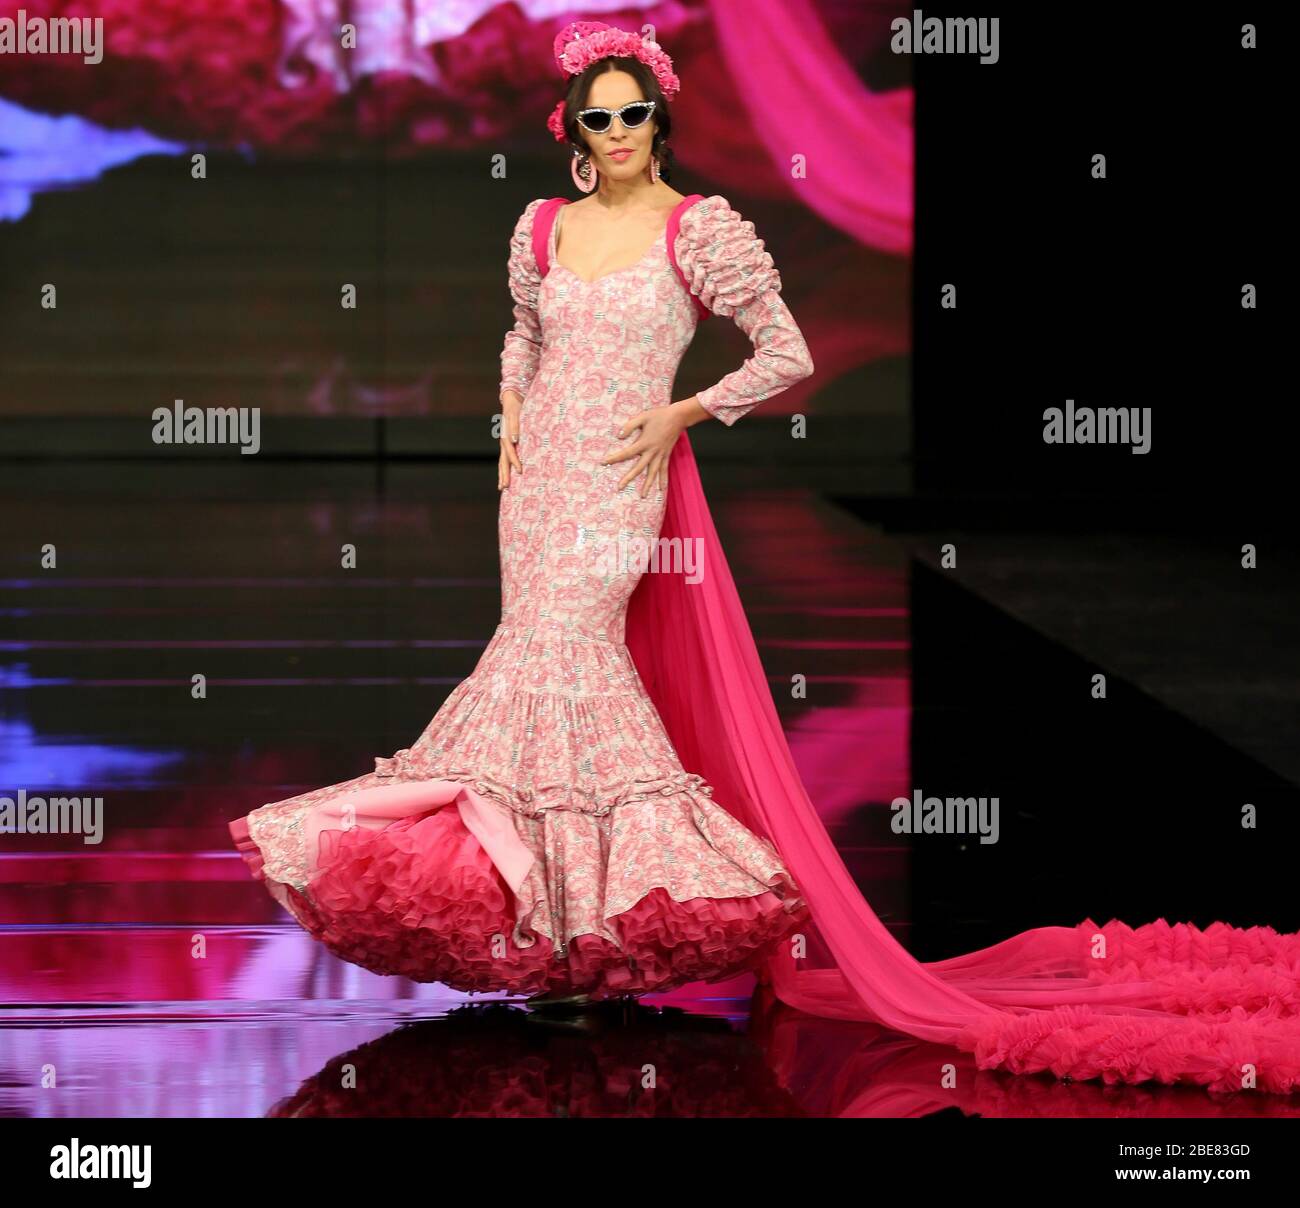 SEVILLA, SPAIN - JAN 30: Model wearing a dress from the Tora collection by designer Pilar Arregui as part of the SIMOF 2020 (Photo credit: Mickael Chavet) Stock Photo